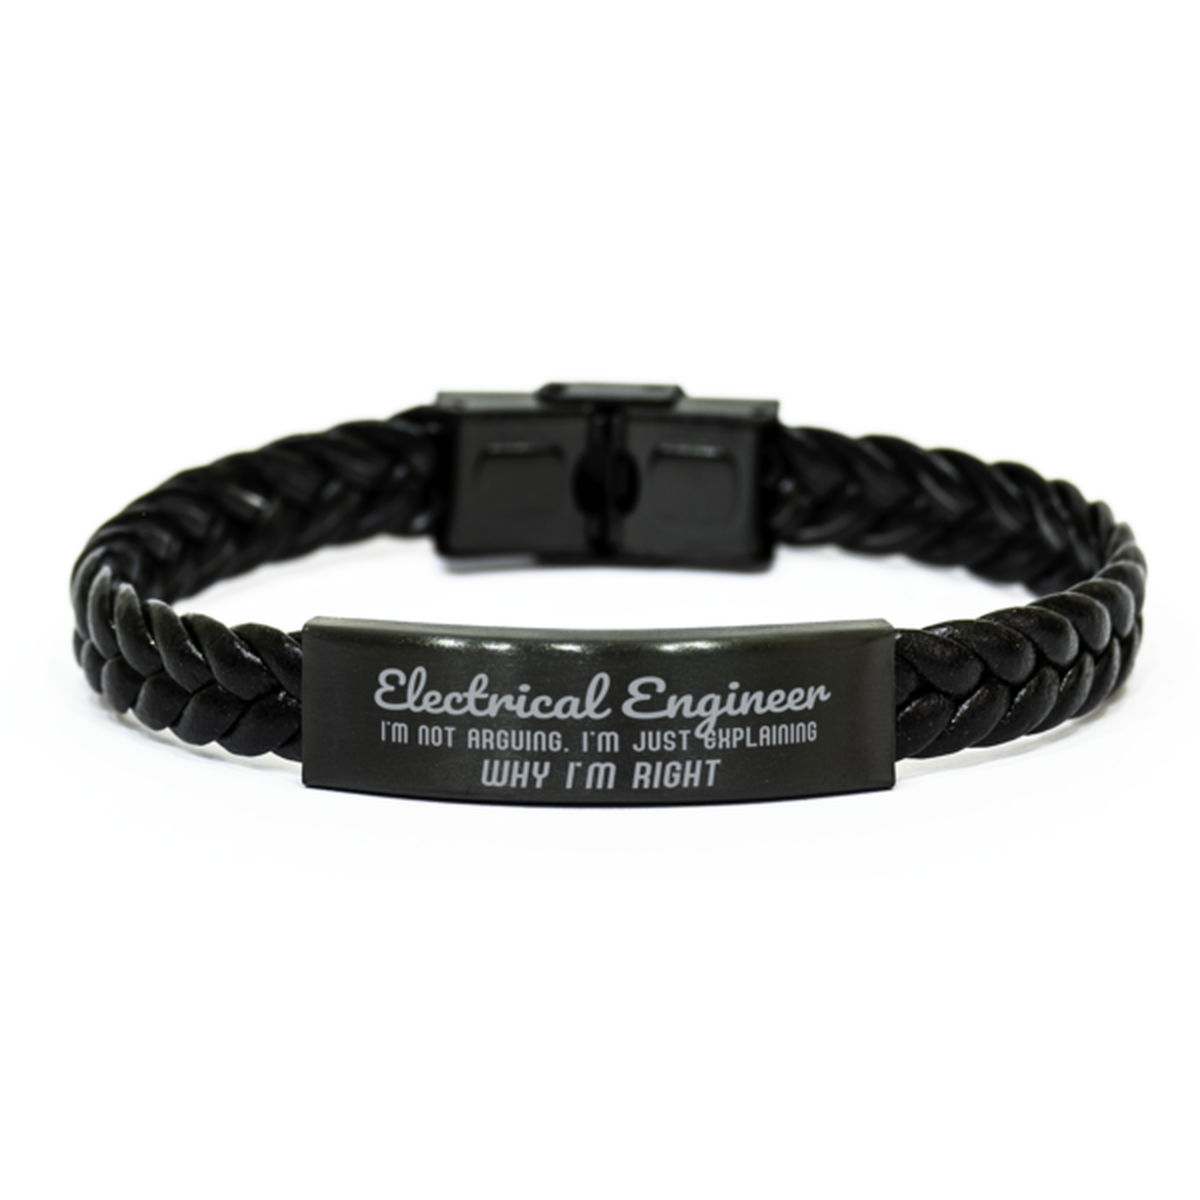 Electrical Engineer I'm not Arguing. I'm Just Explaining Why I'm RIGHT Braided Leather Bracelet, Graduation Birthday Christmas Electrical Engineer Gifts For Electrical Engineer Funny Saying Quote Present for Men Women Coworker